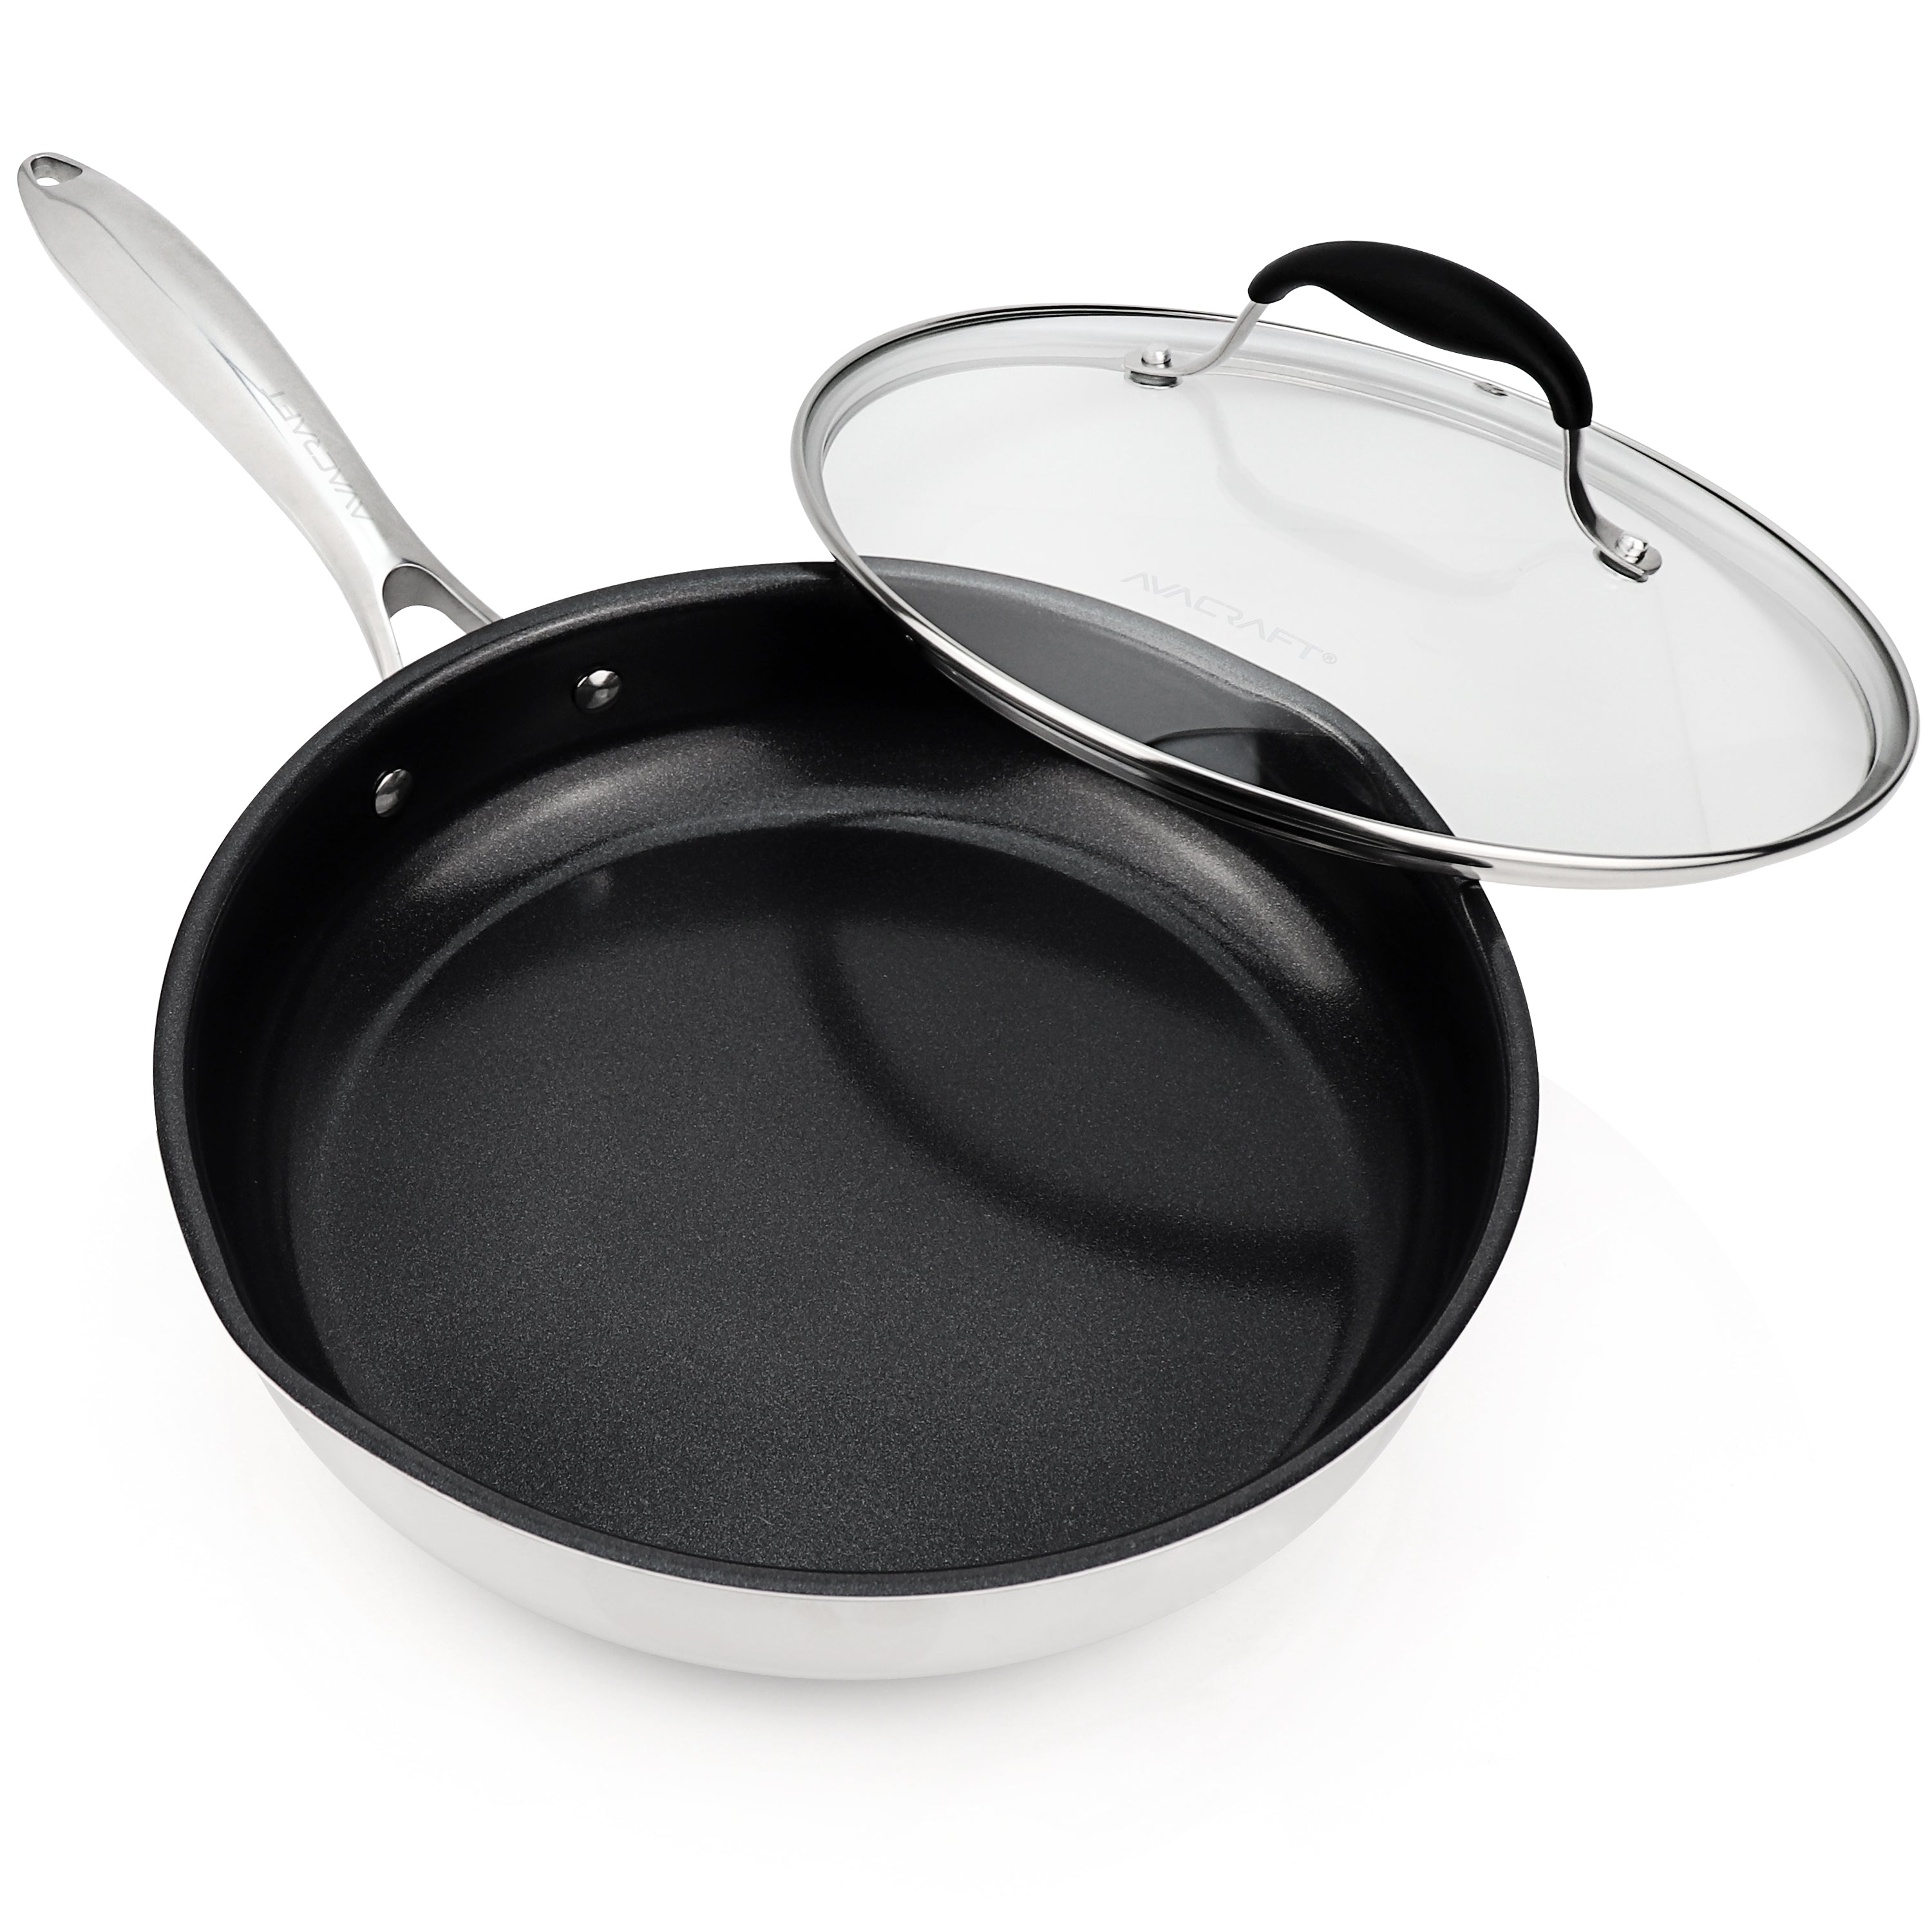 Nonstick Frying Pan With Glass Lid, Chef's Pans, Skillet, Egg Fry